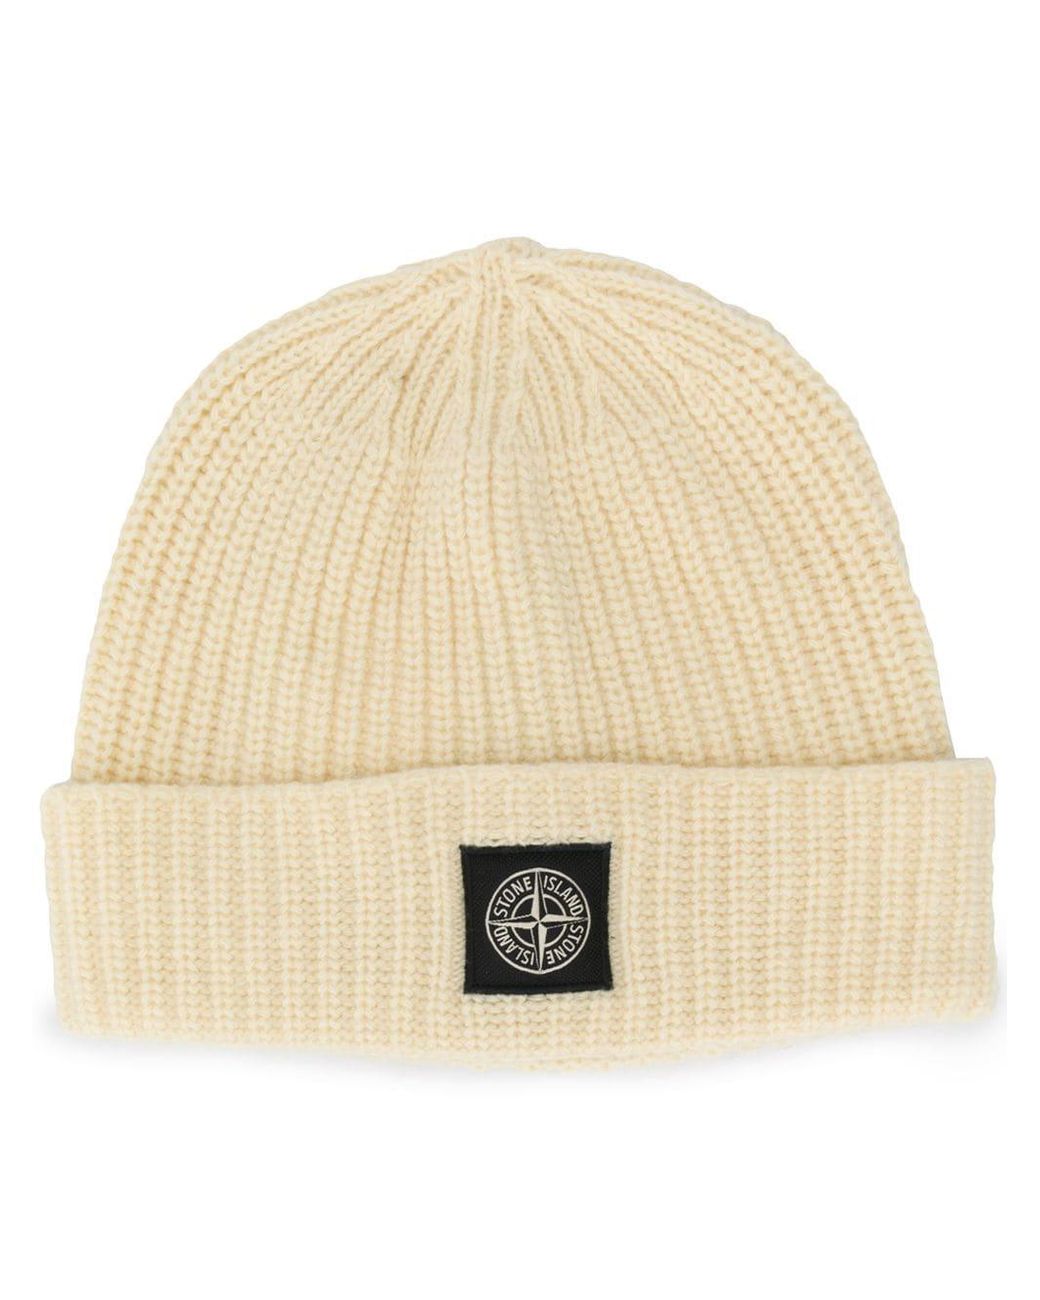 Stone Island Wool Ribbed Knit Beanie in Natural for Men - Lyst